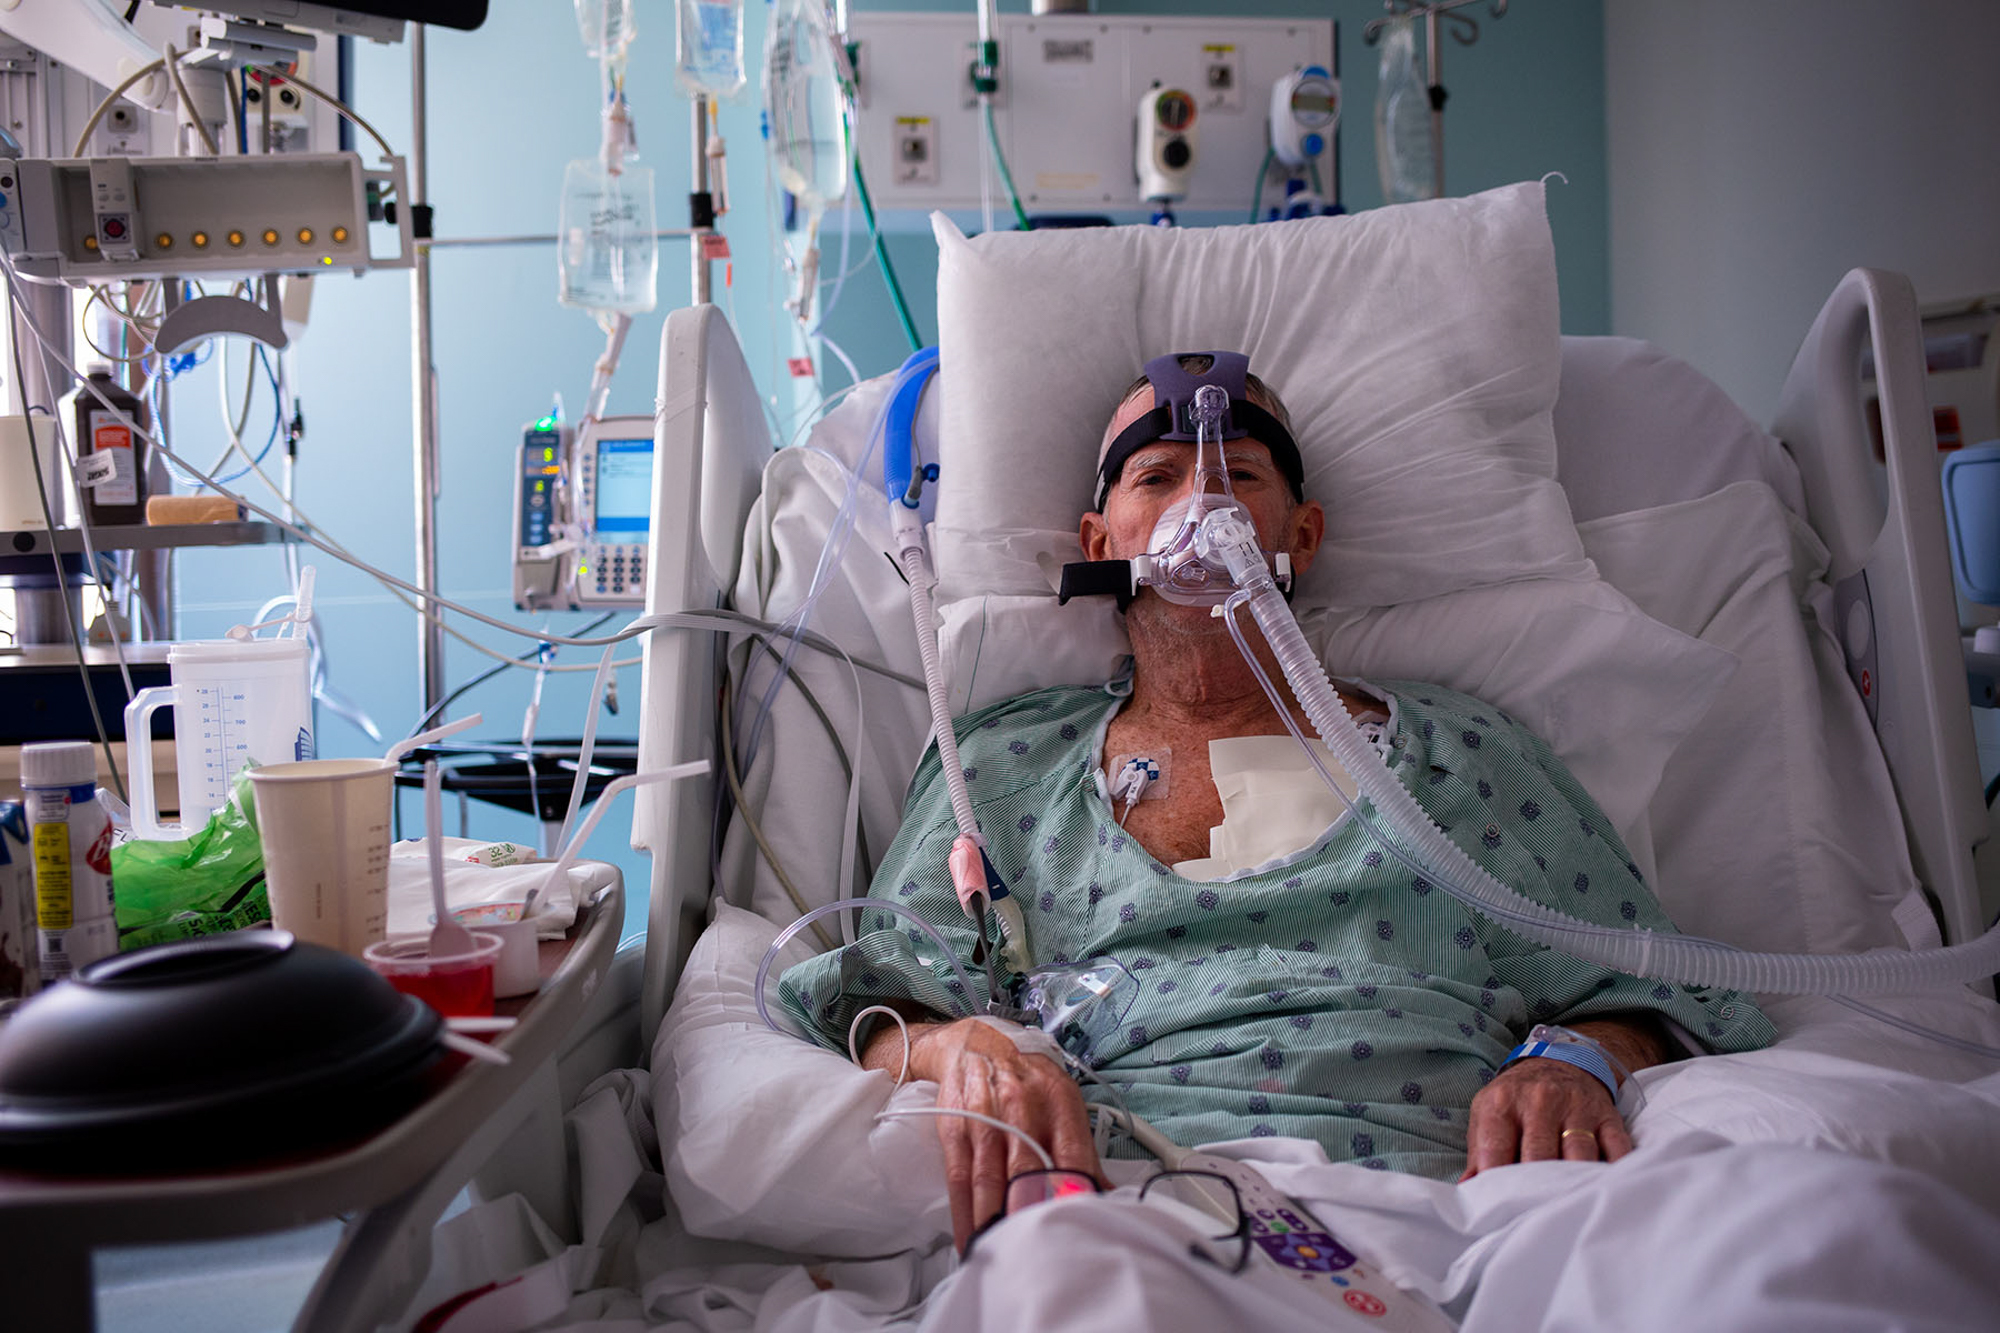 Prayer For Covid Patient On Ventilator - List That Are Very Powerful